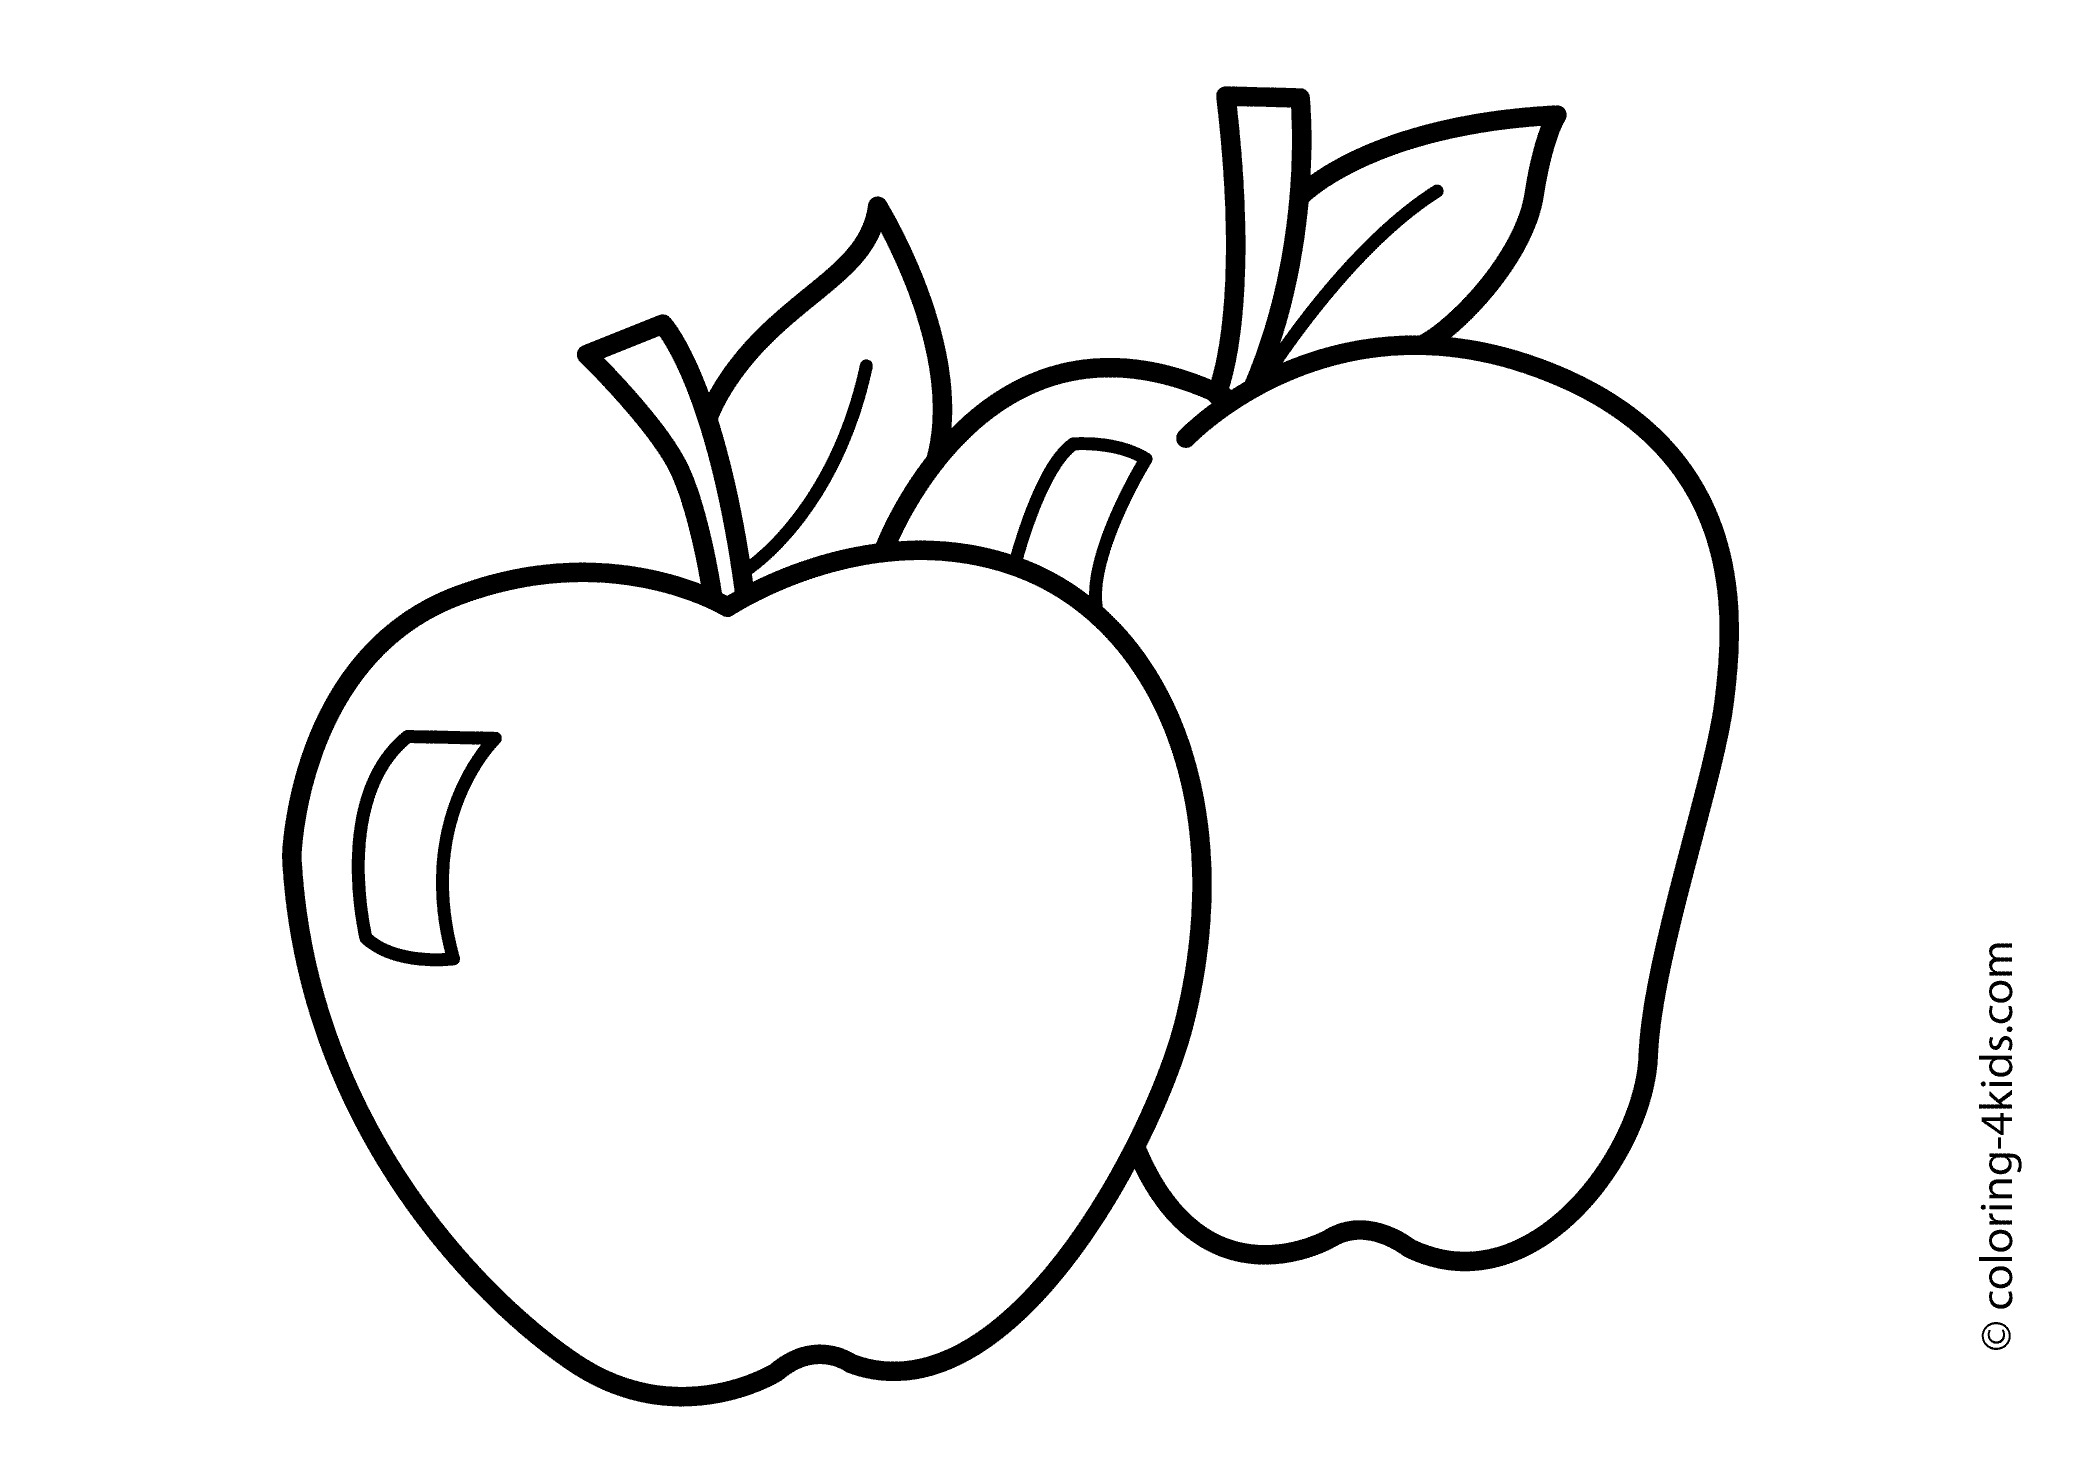 coloring pages for apples good apple coloring page wecoloringpagecom coloring for pages apples 